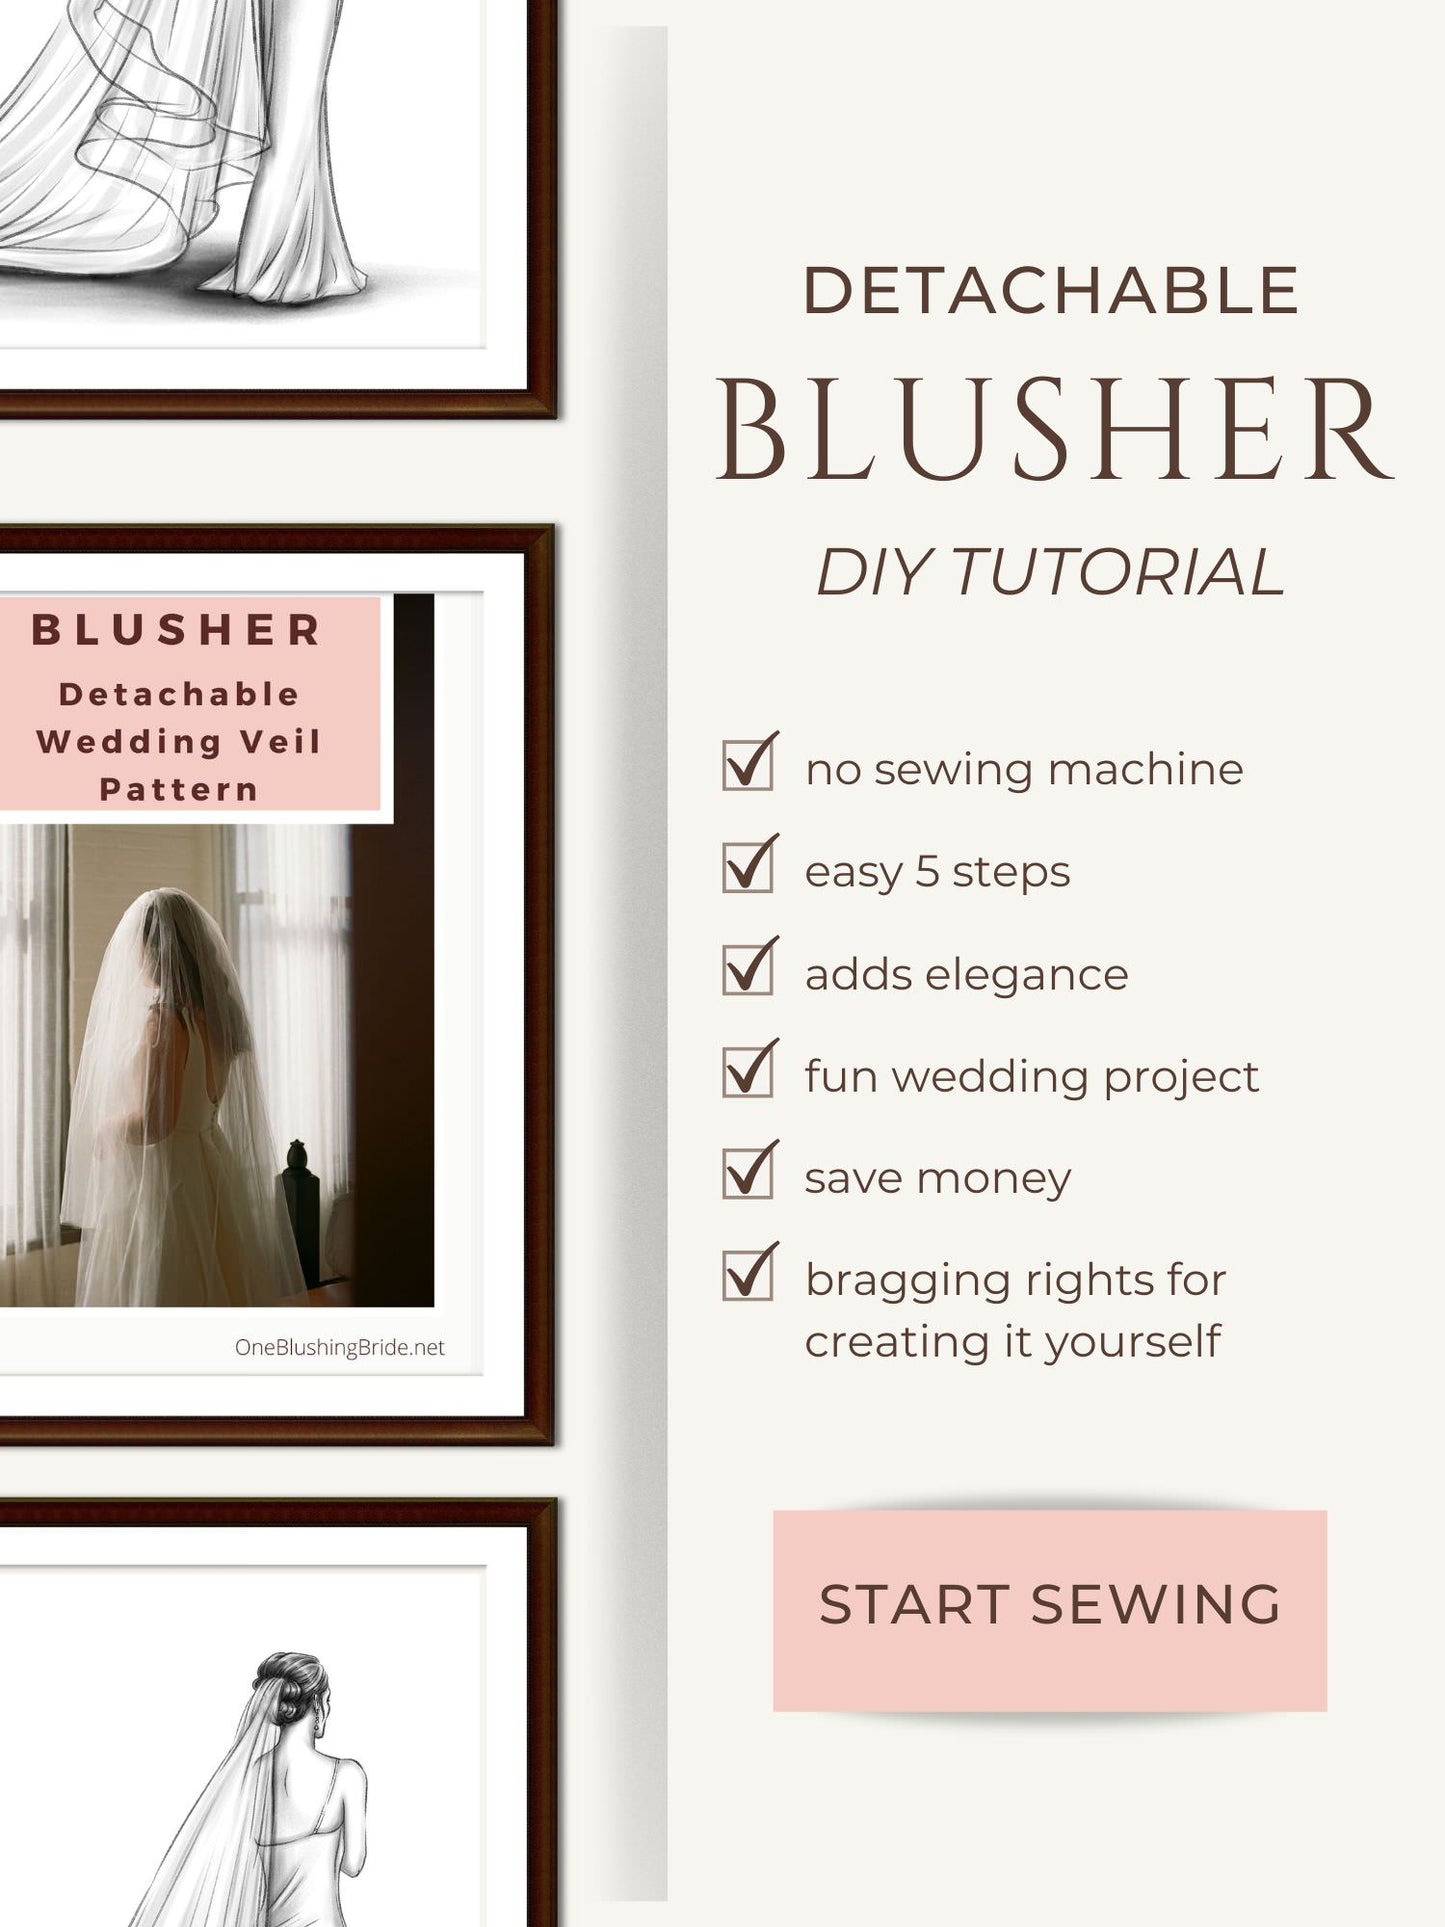 do it yourself tutorial for how to make your own blusher wedding veil without sewing machine